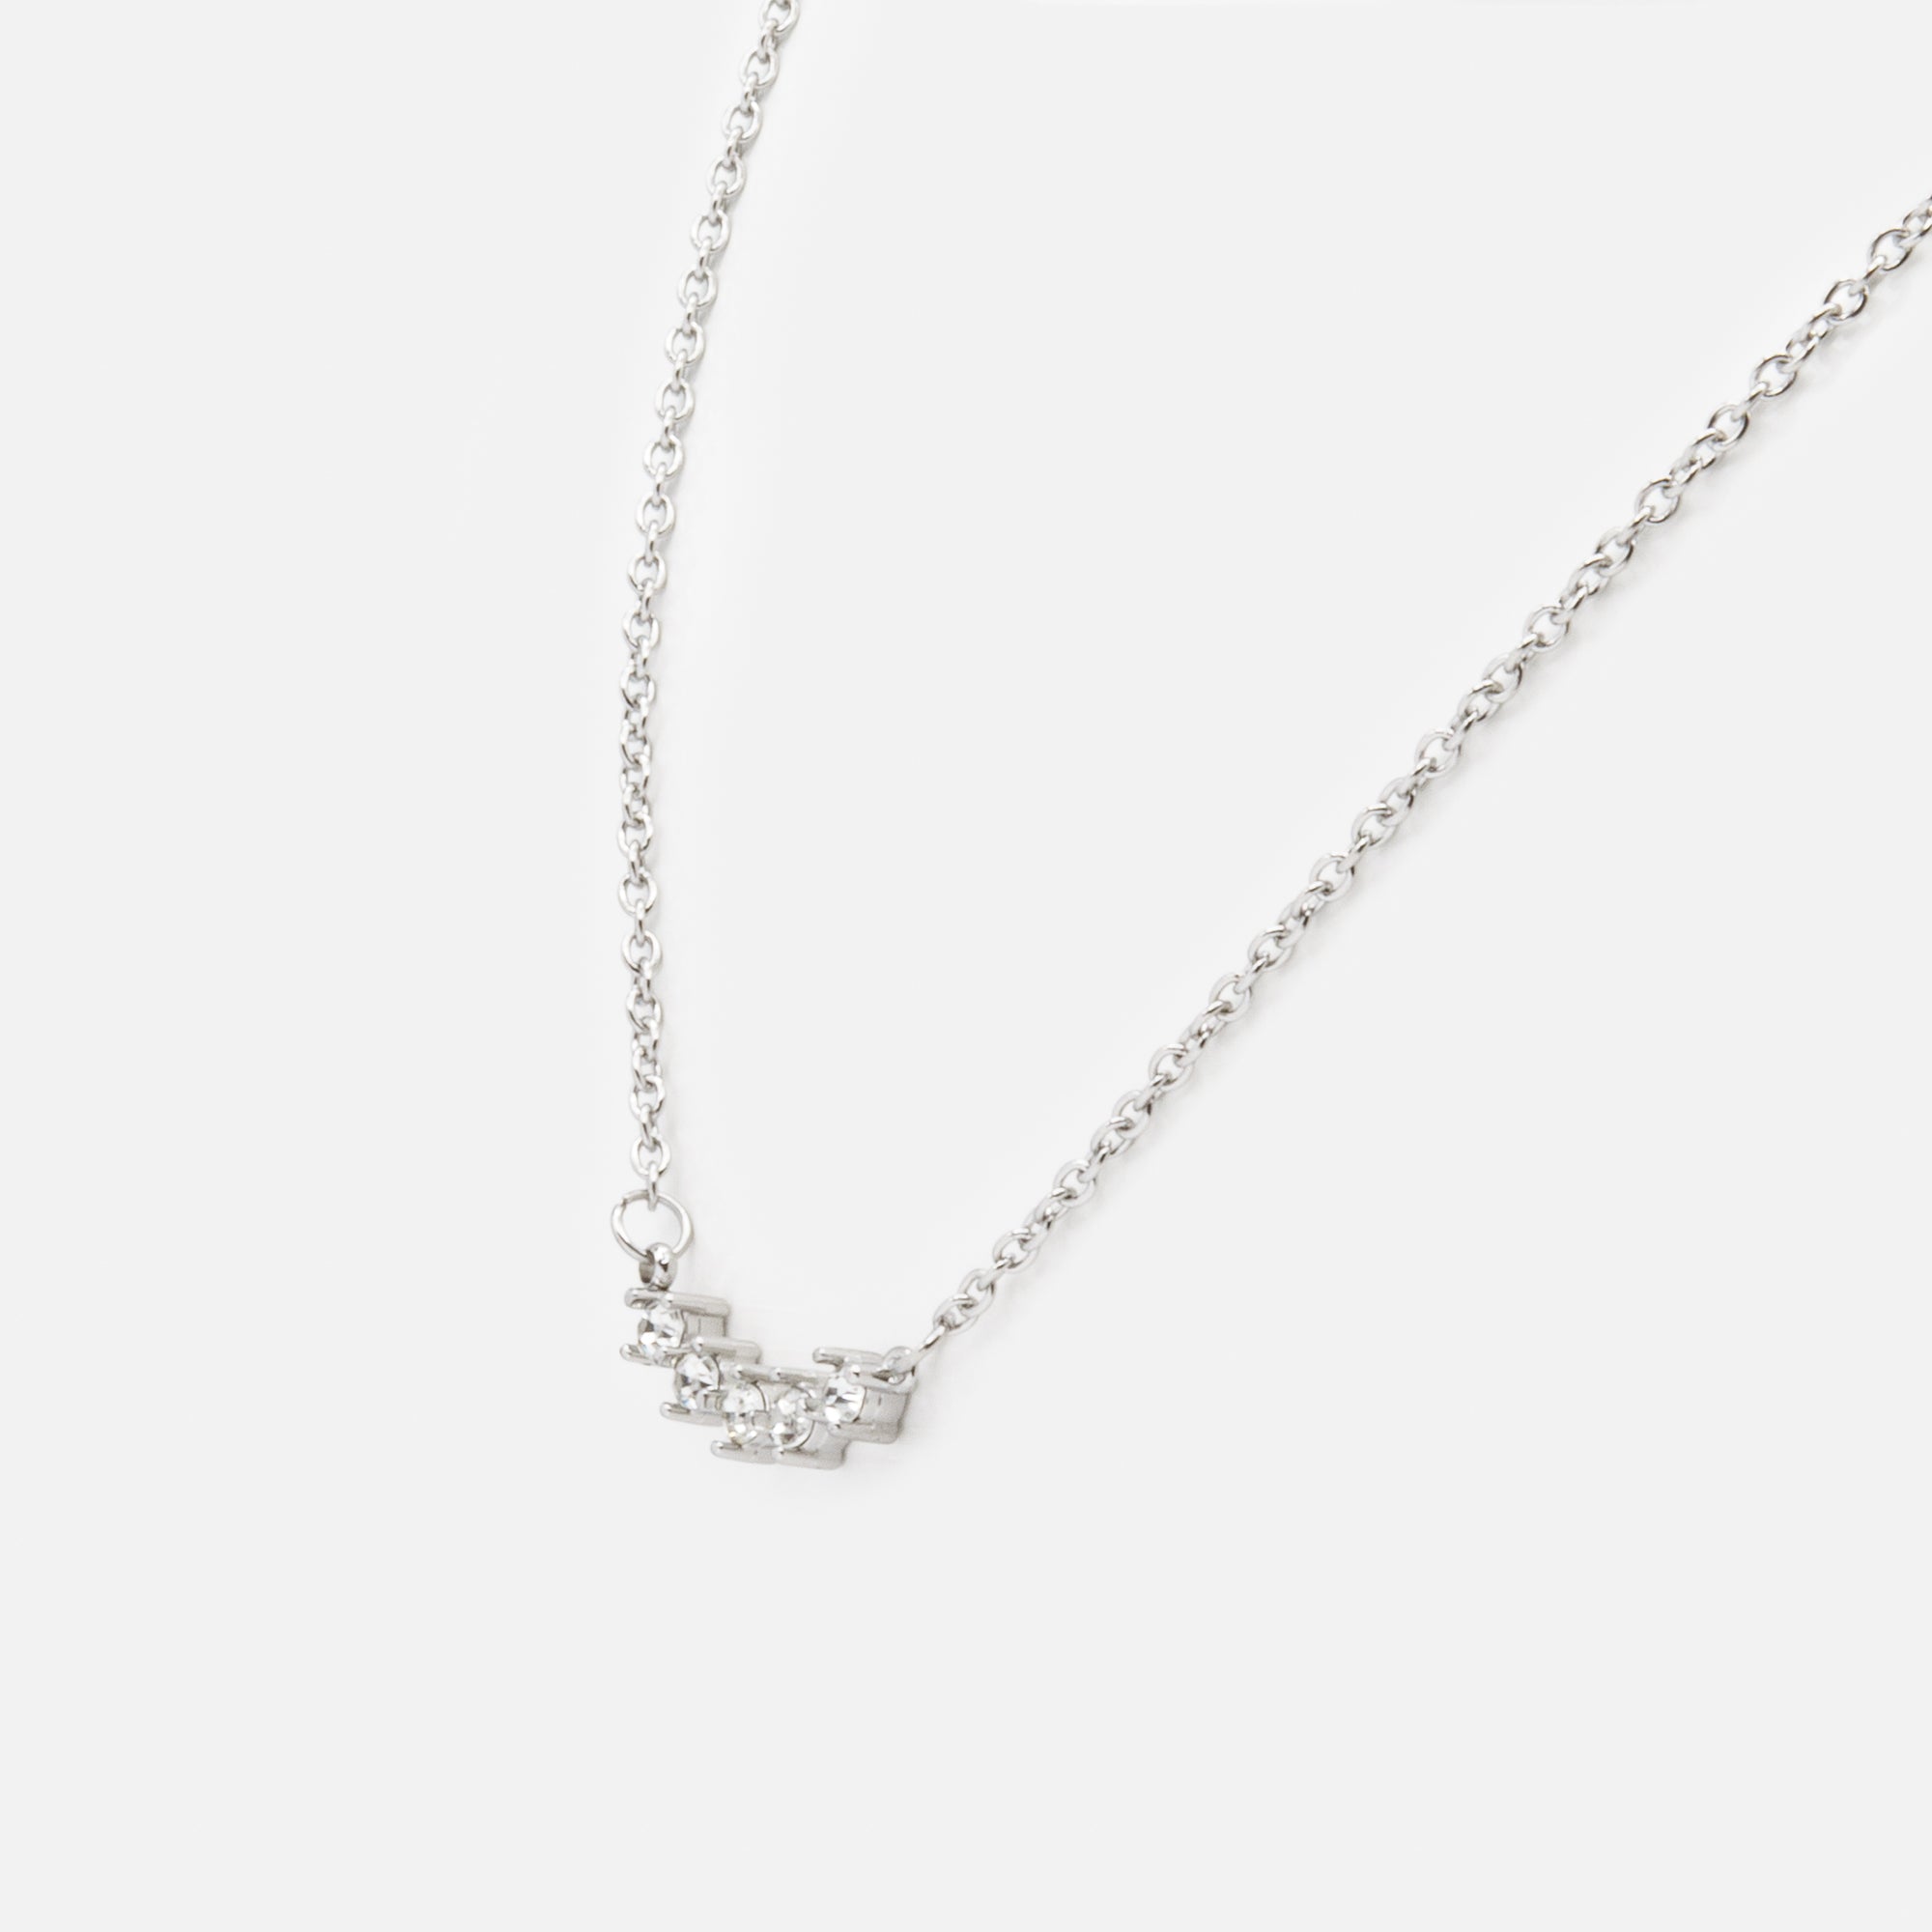 Silver necklace with its five cubic zirconias in stainless steel